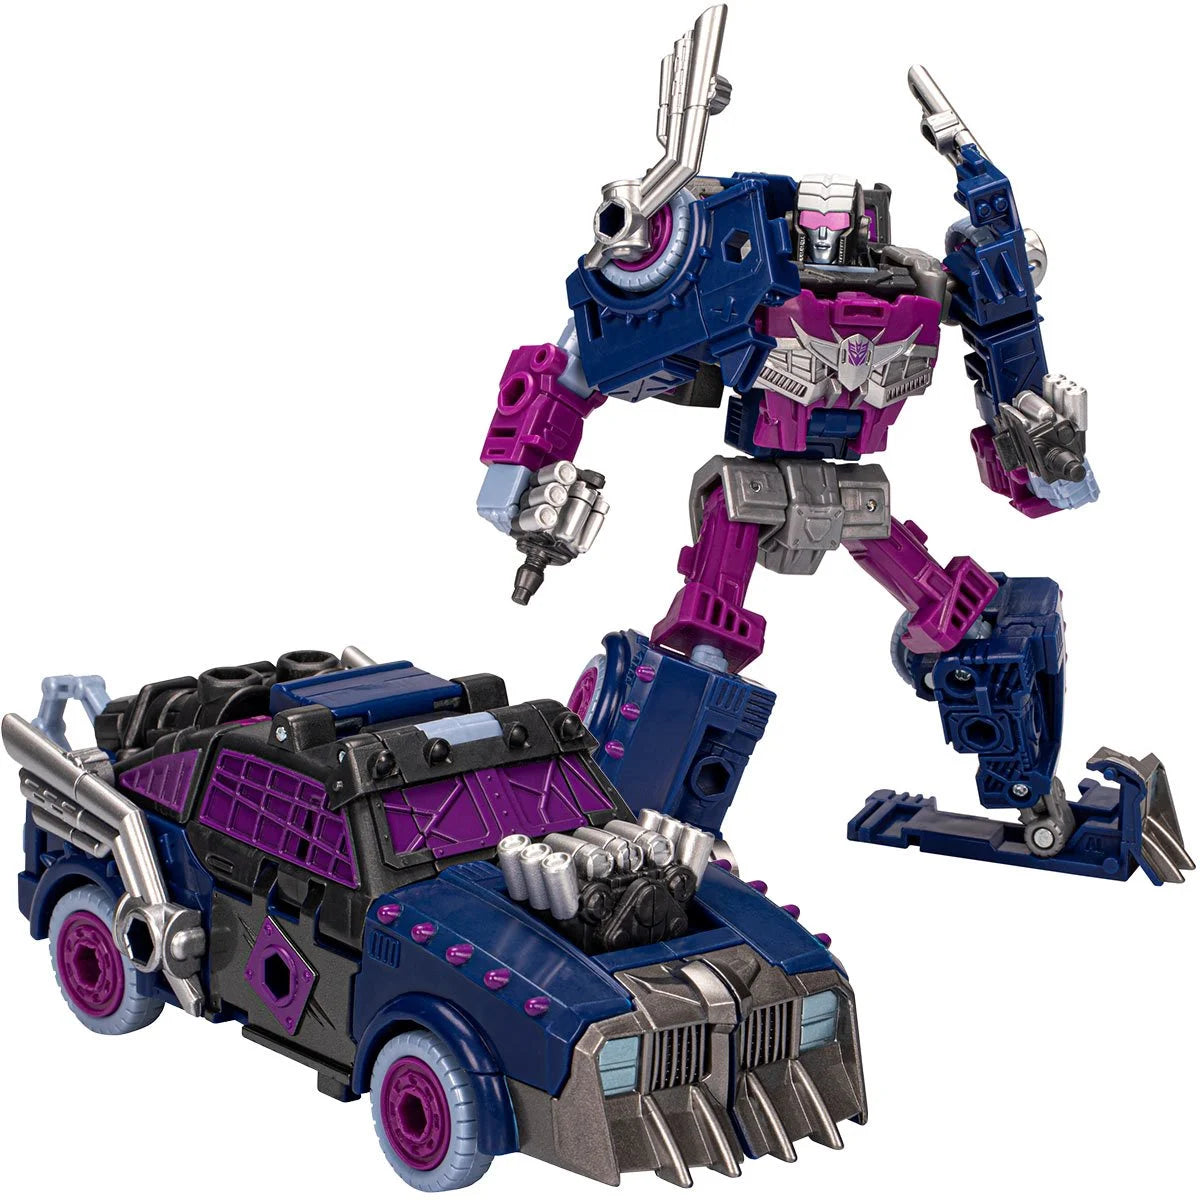 Transformers Generations Legacy Evolution Deluxe Axlegrease Action Figure Toy - Heretoserveyou